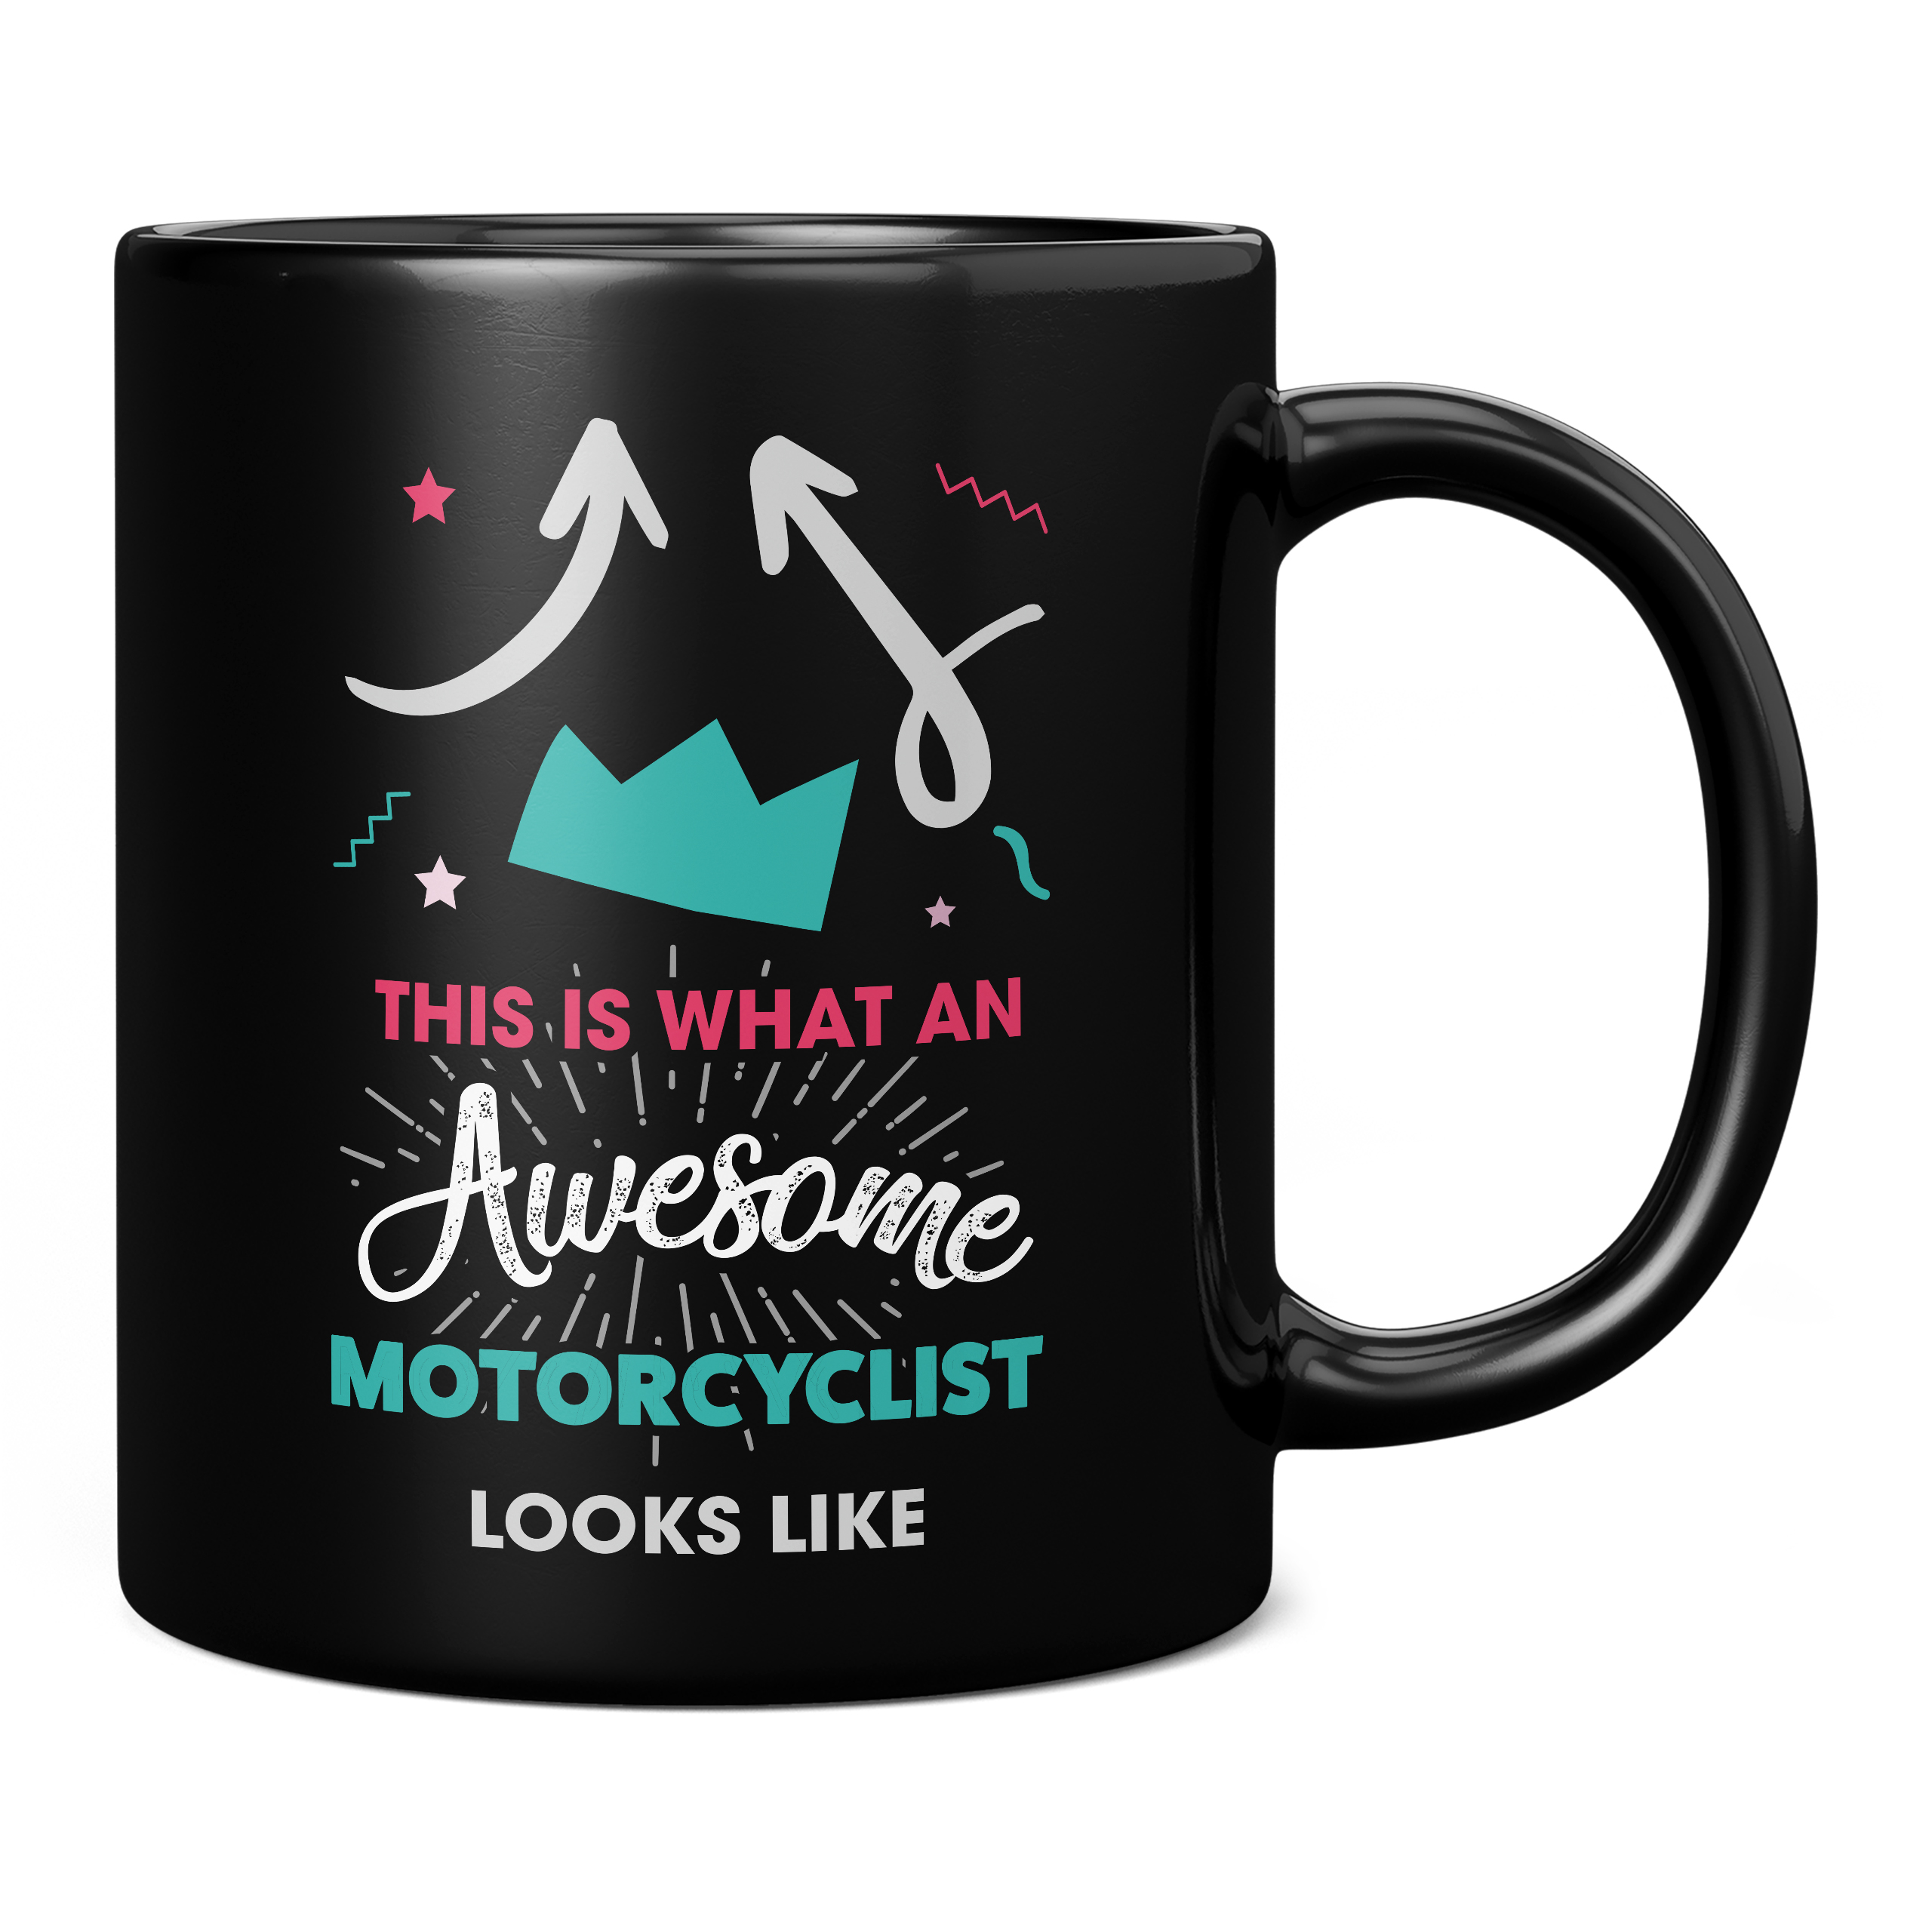 THIS IS WHAT AN AWESOME MOTORCYCLIST LOOKS LIKE 11OZ NOVELTY MUG